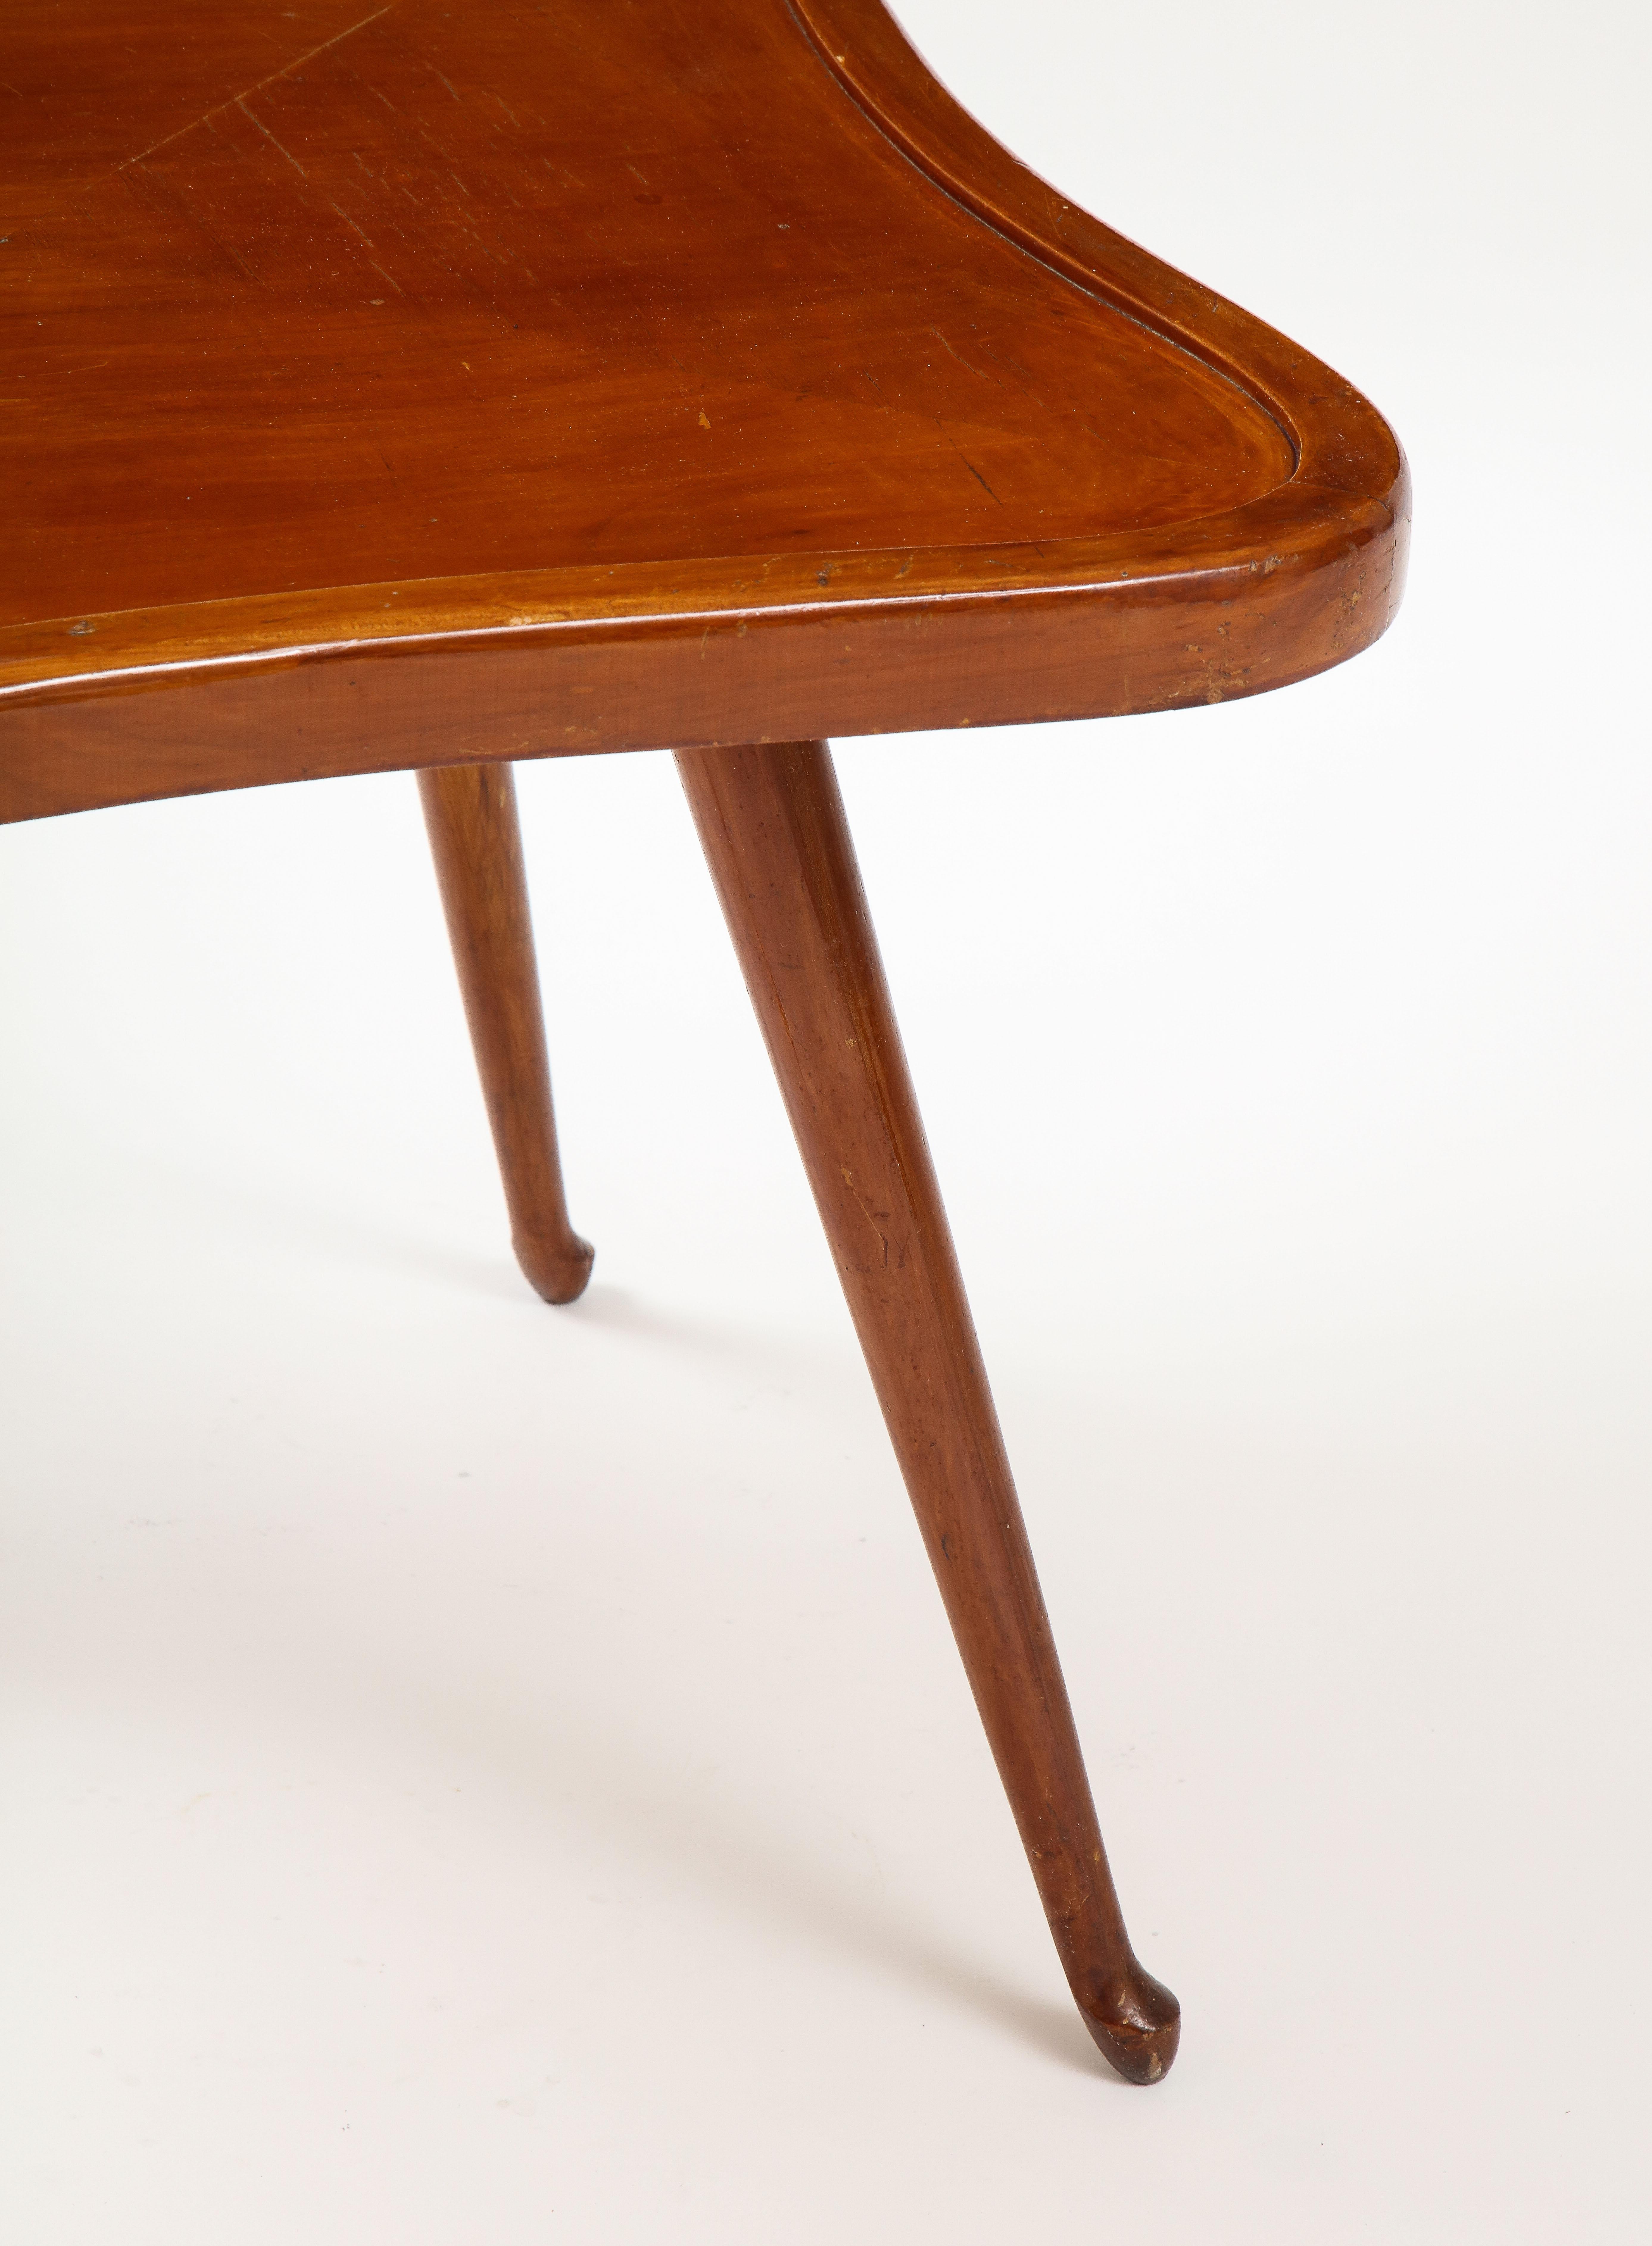 Mid-20th Century Paolo Buffa 'Attrib.' Occasional Clover Shaped Table, c. 1950-60